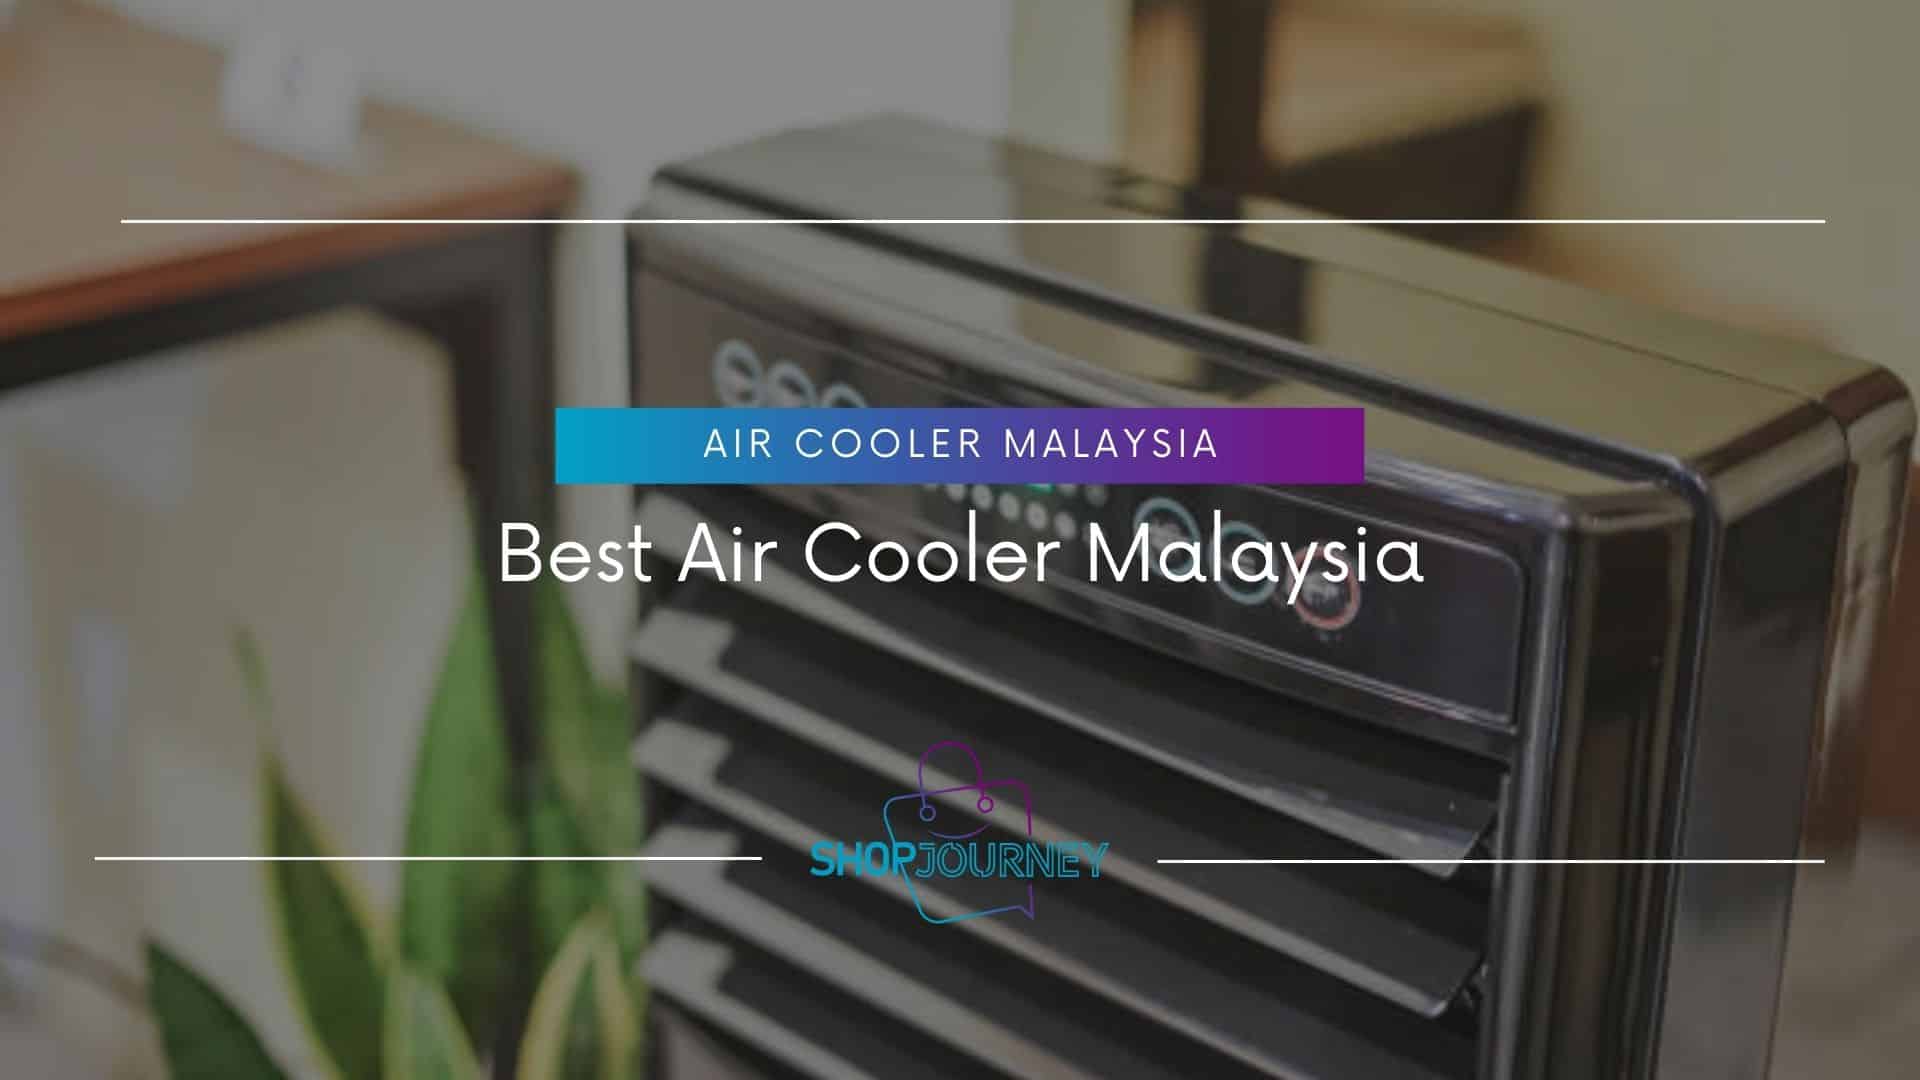 Best Air Cooler Malaysia - Shop Journey